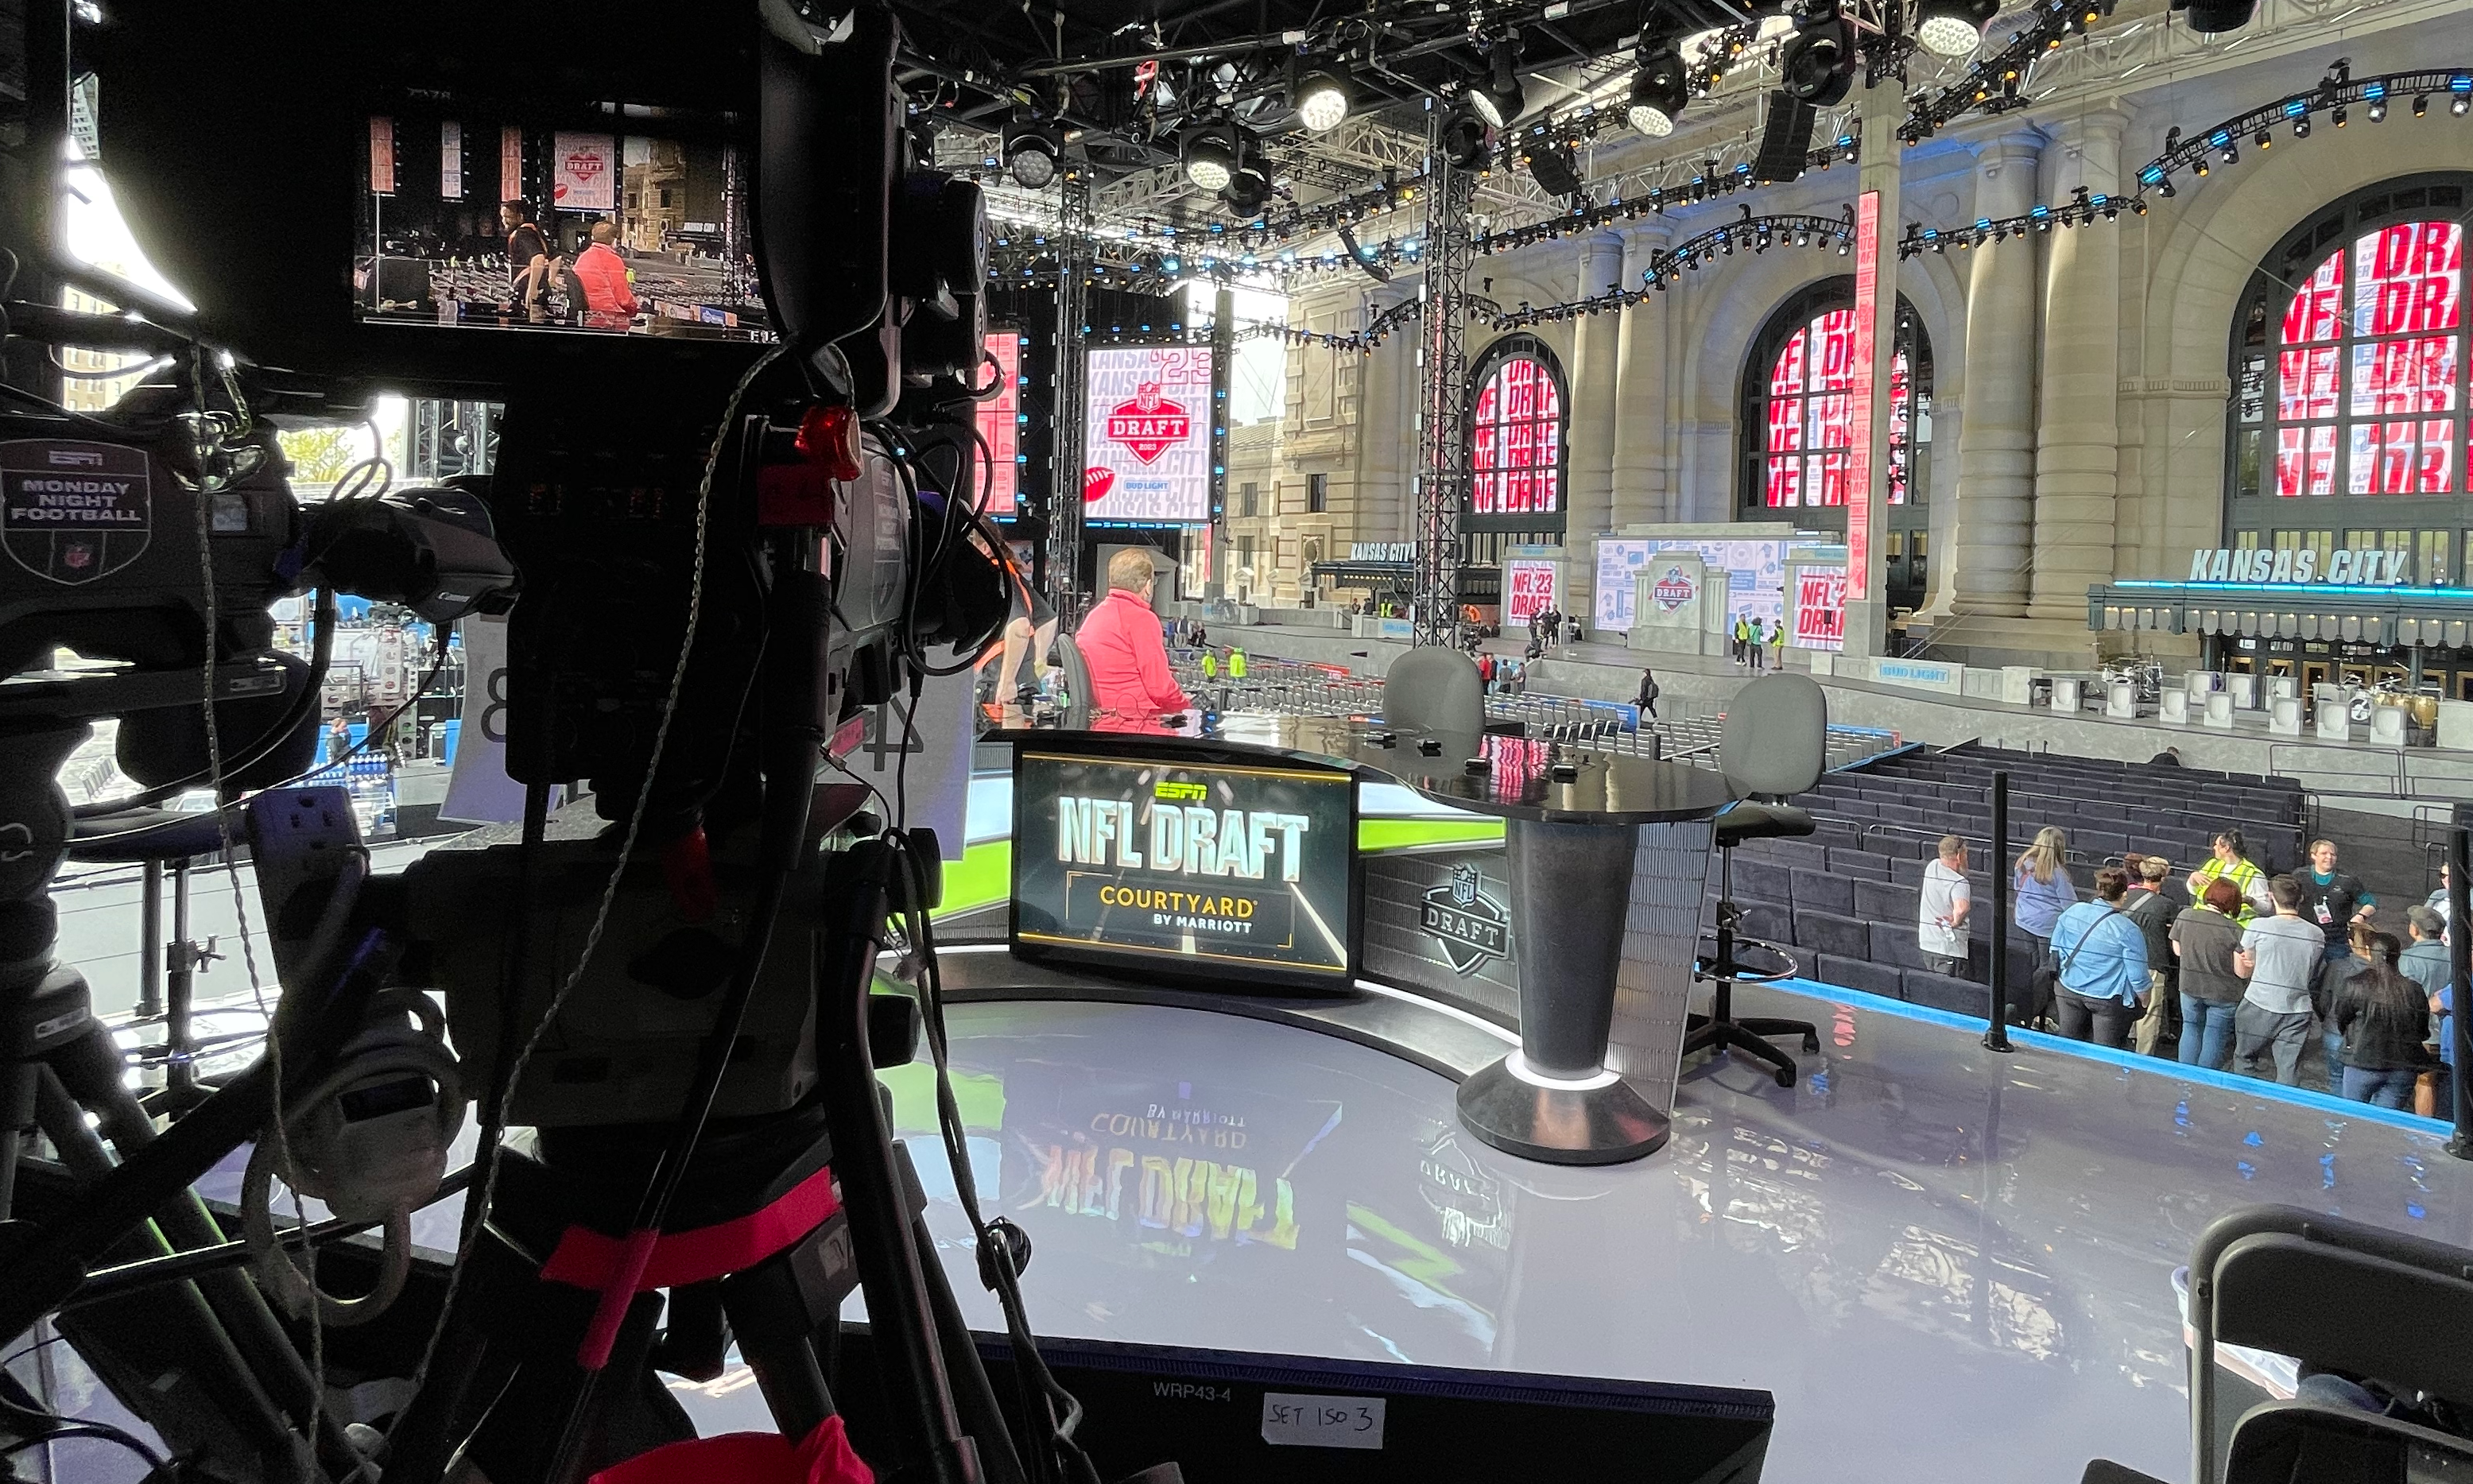 Live From NFL Draft 2023: Multiple Jibs, RF Cameras, AR Graphics